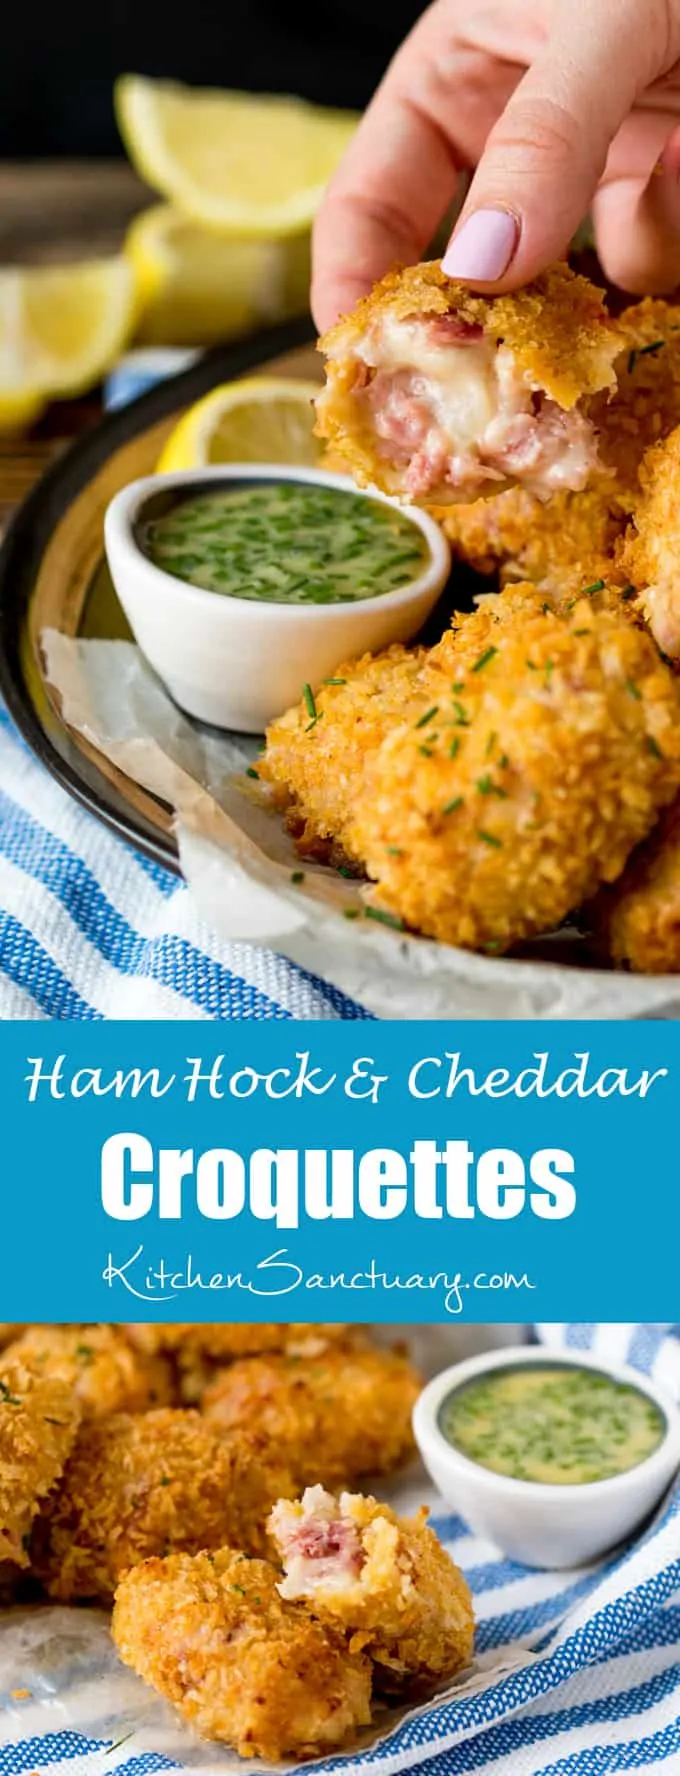 Ham Hock and Cheddar Croquettes with honey mustard dip. A delicious make ahead party food or snack that's baked not fried!